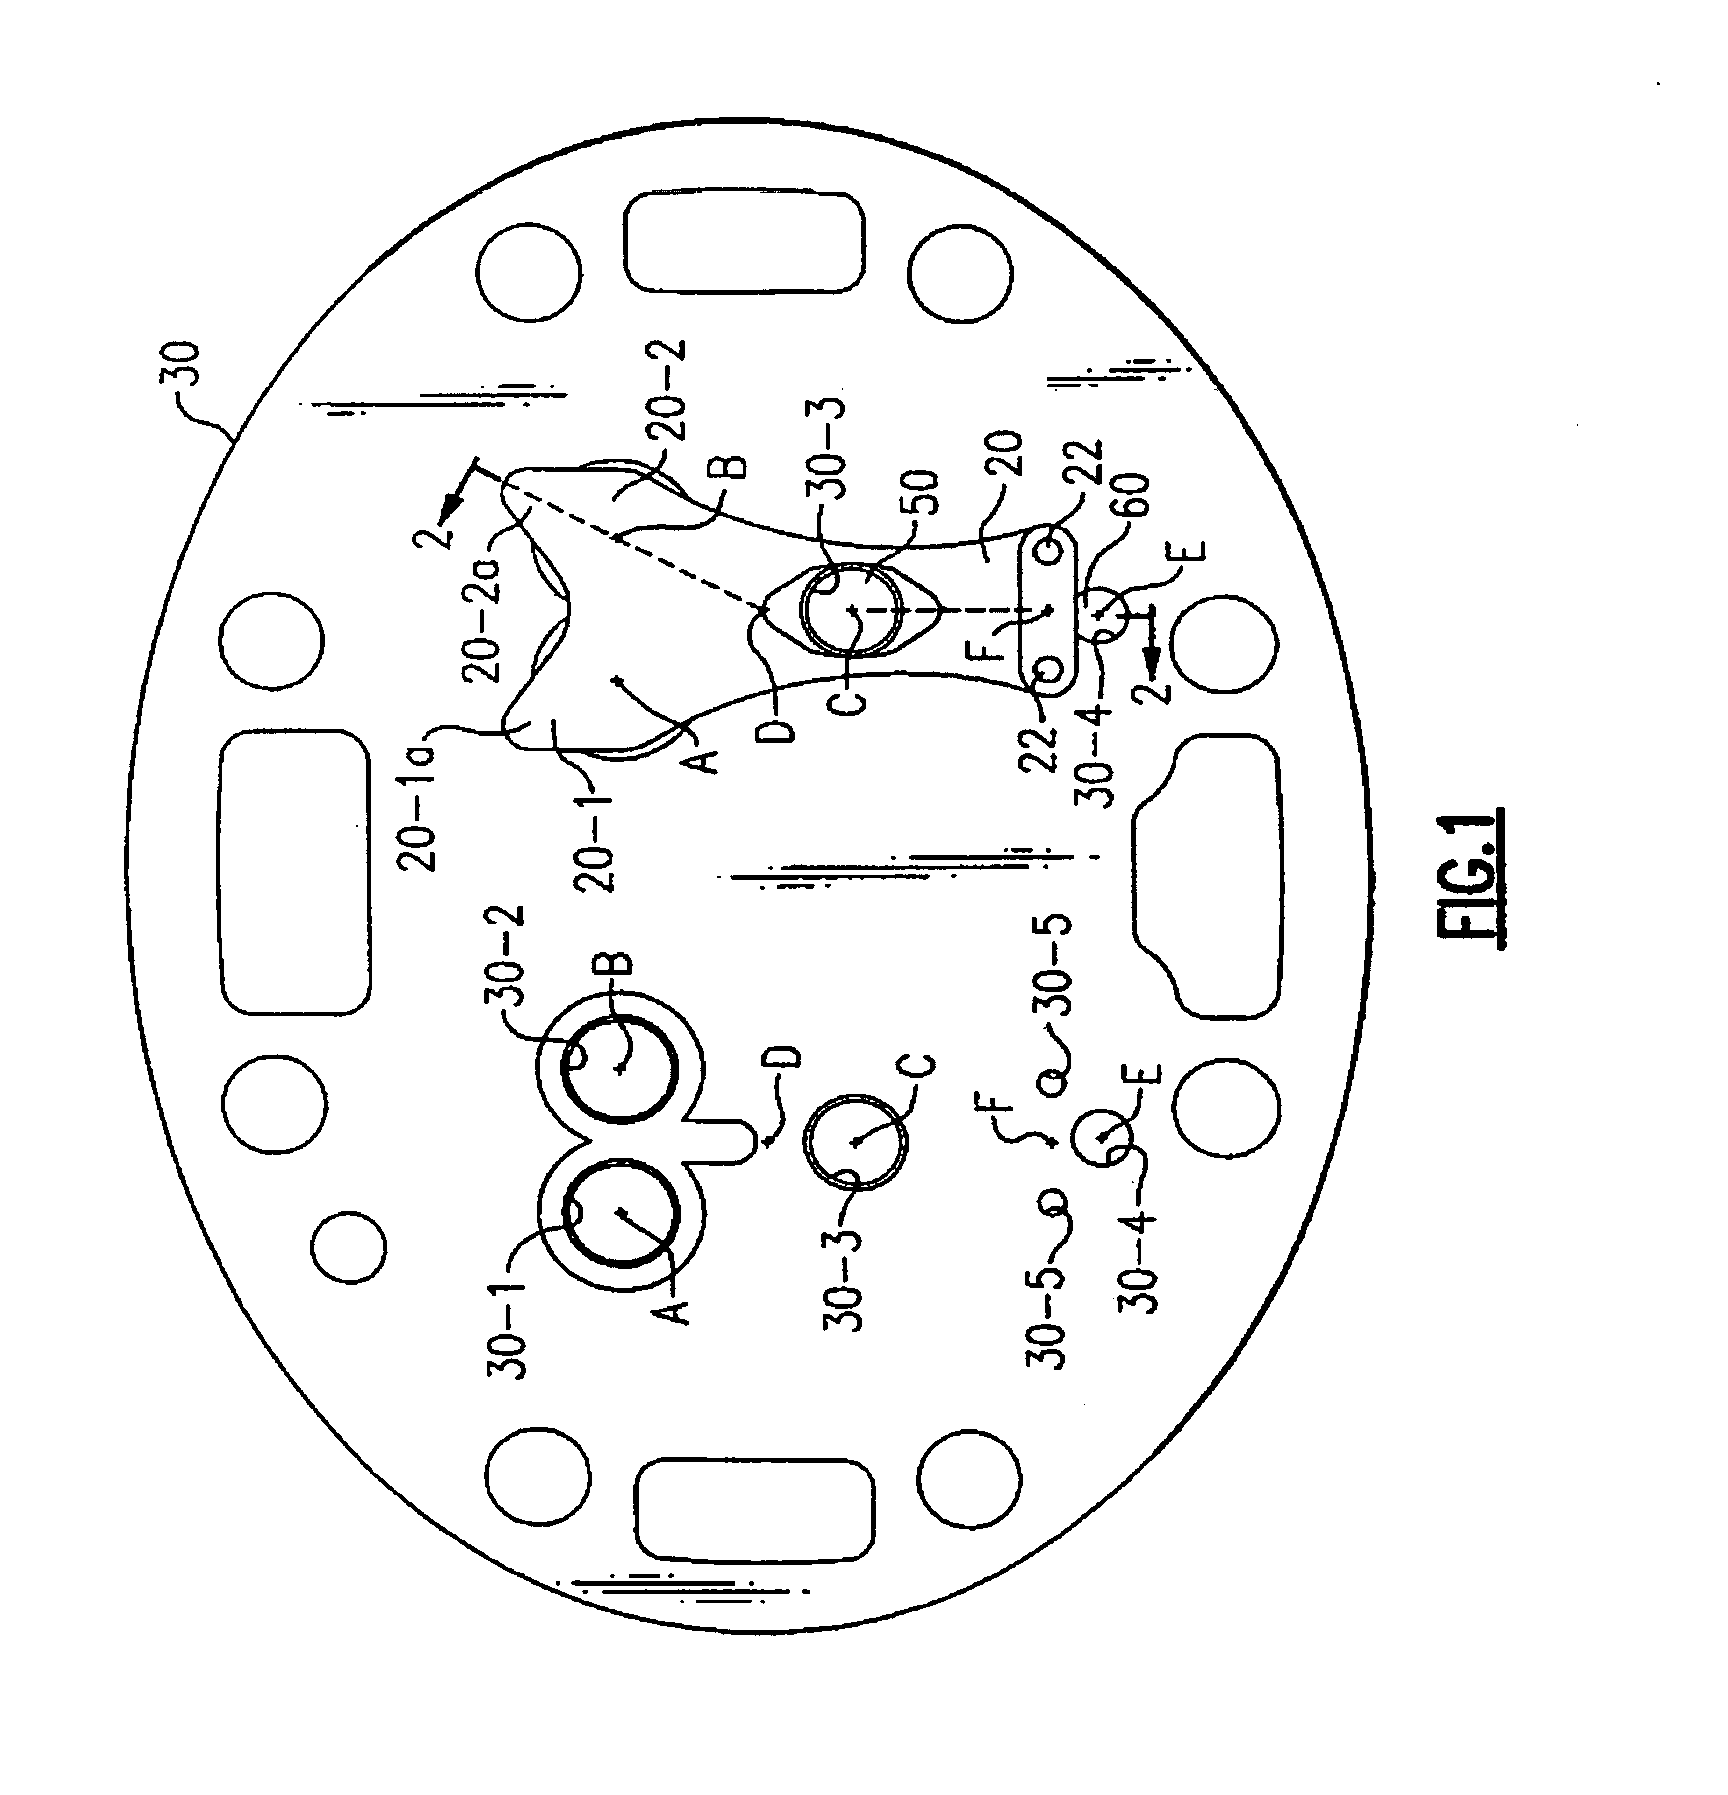 Multi-port suction reed valve with optimized tips